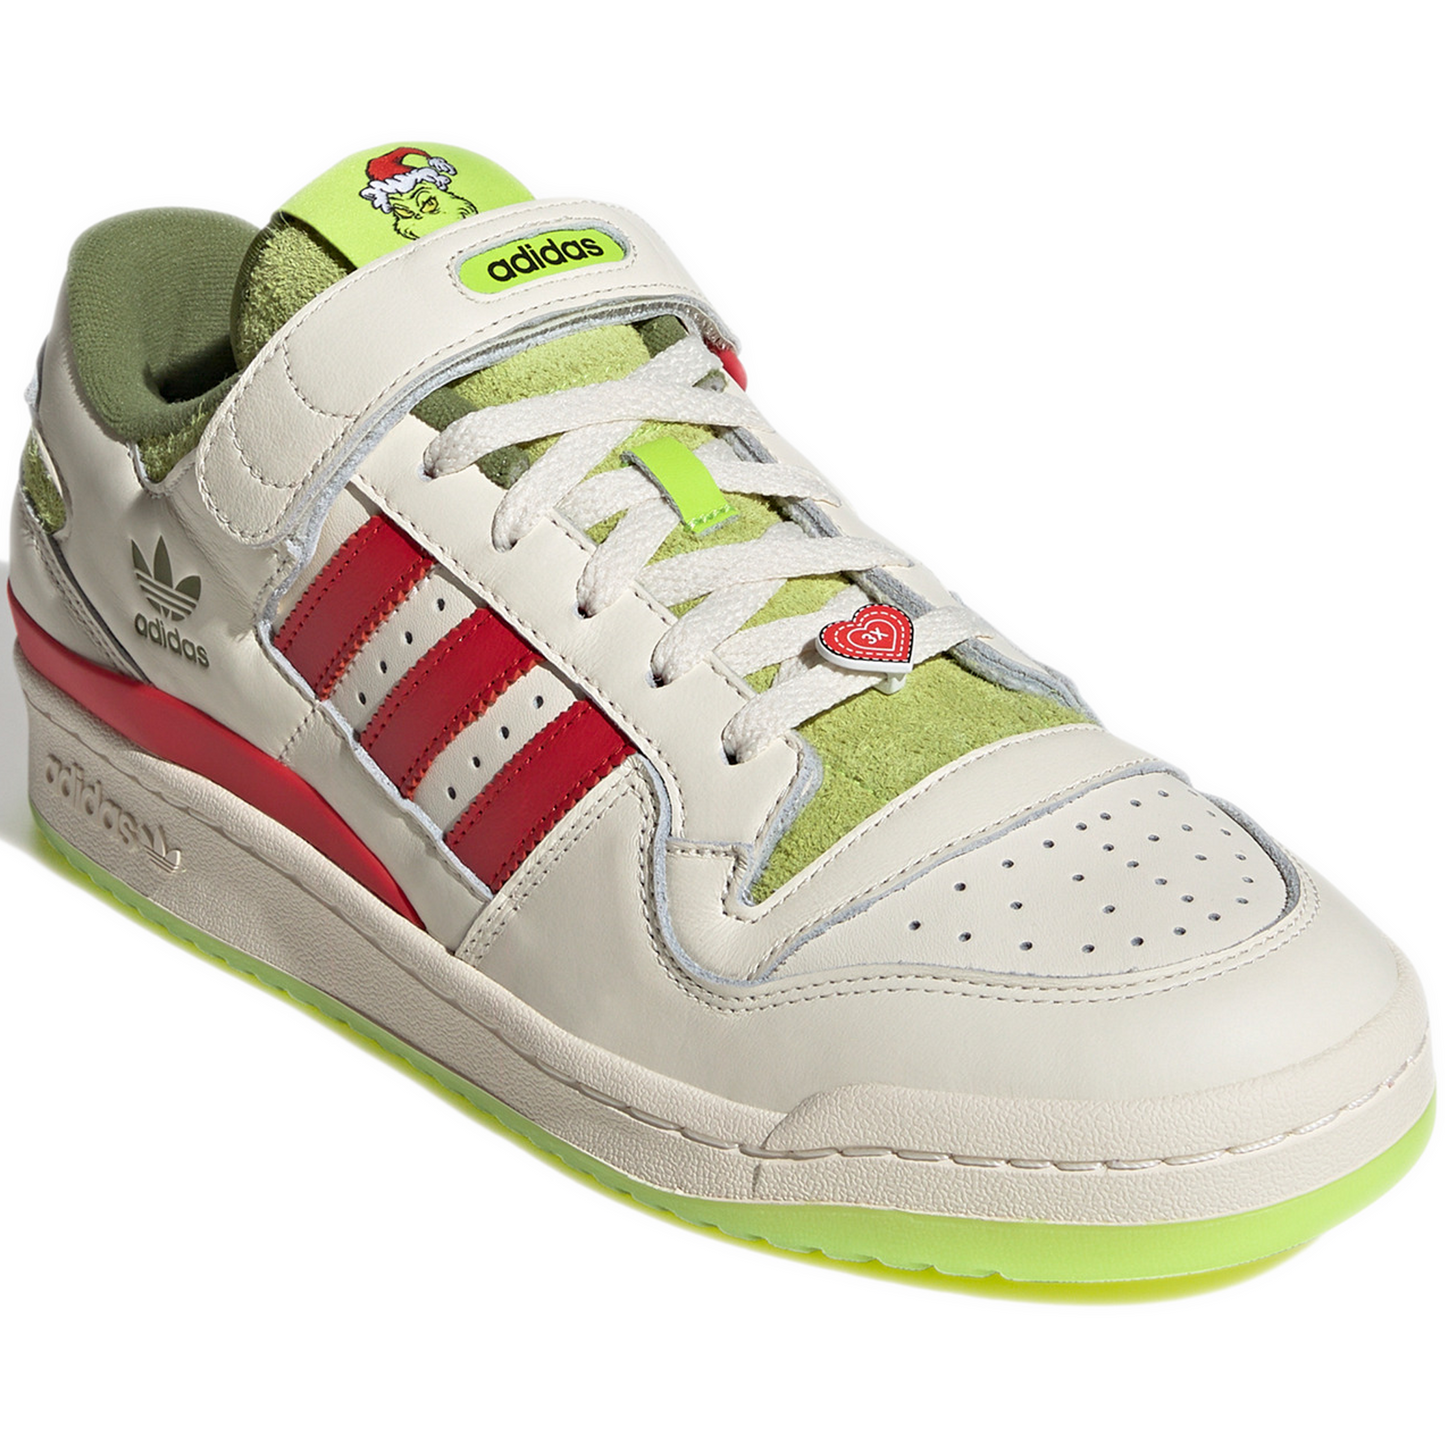 Men's Adidas Forum Low X The Grinch Shoes - White/ Red/ Green